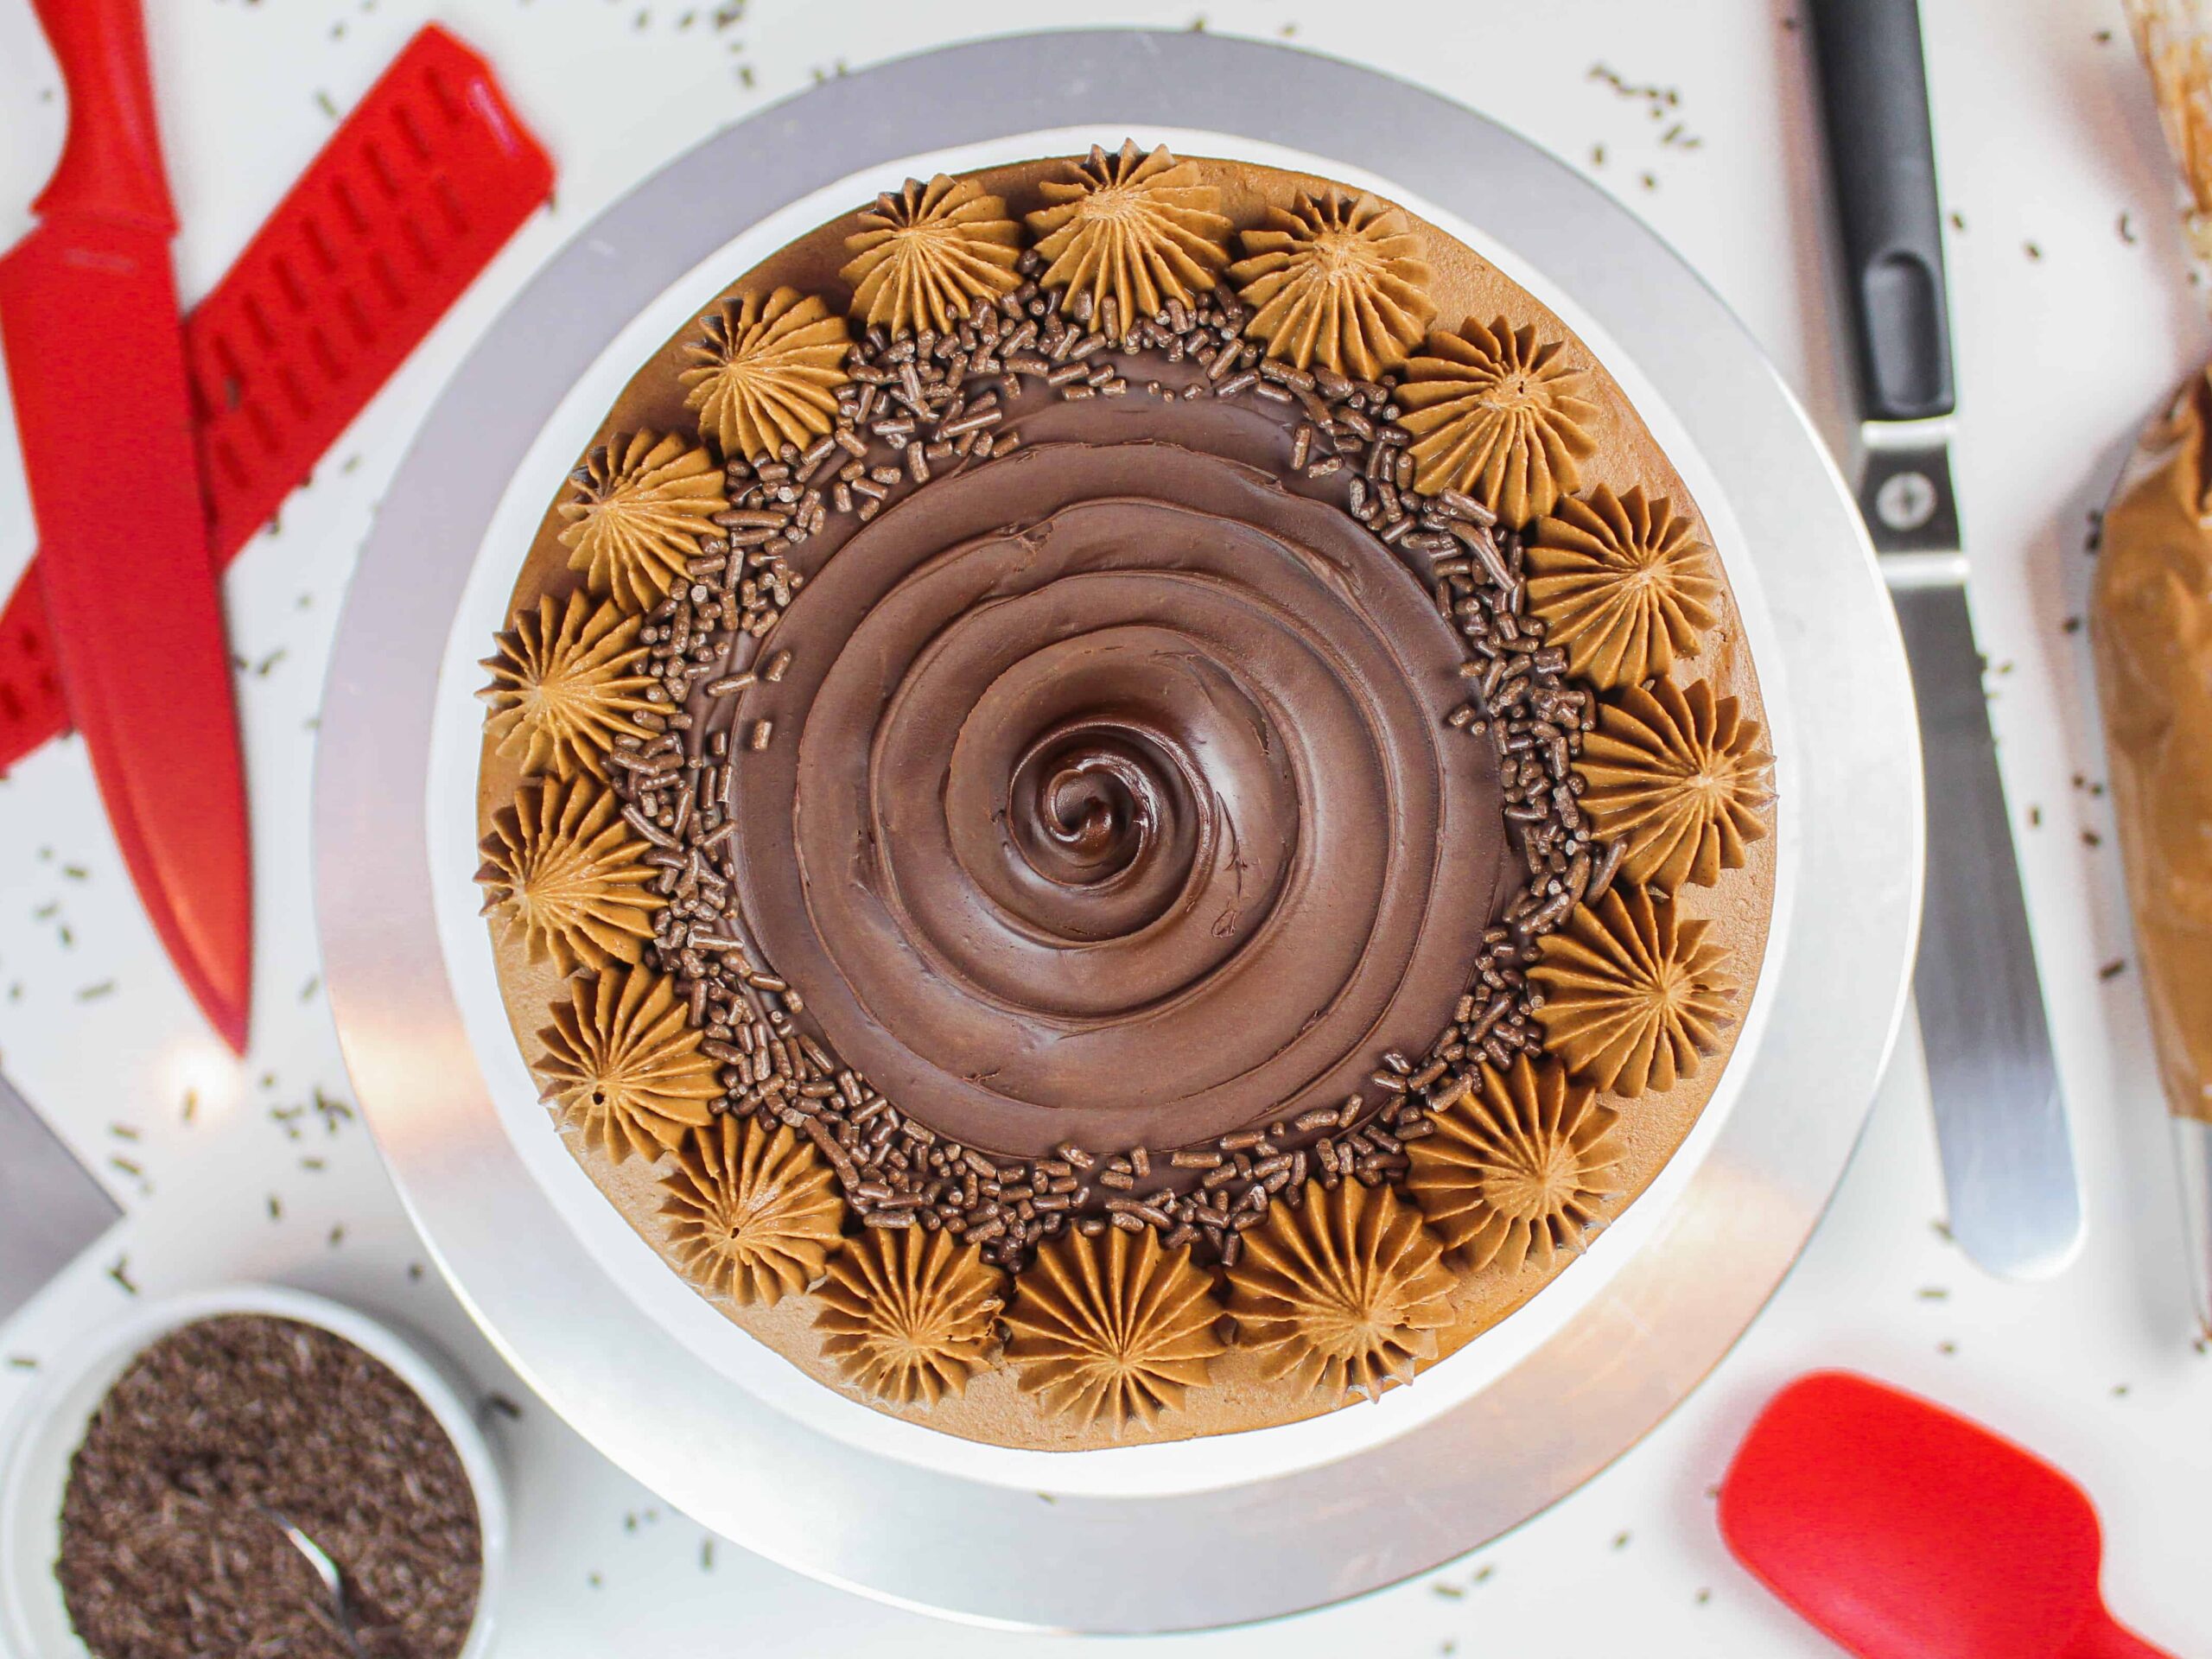 image of gluten free chocolate cake from overhead, decorated with a chocolate swirl and buttercream dollops